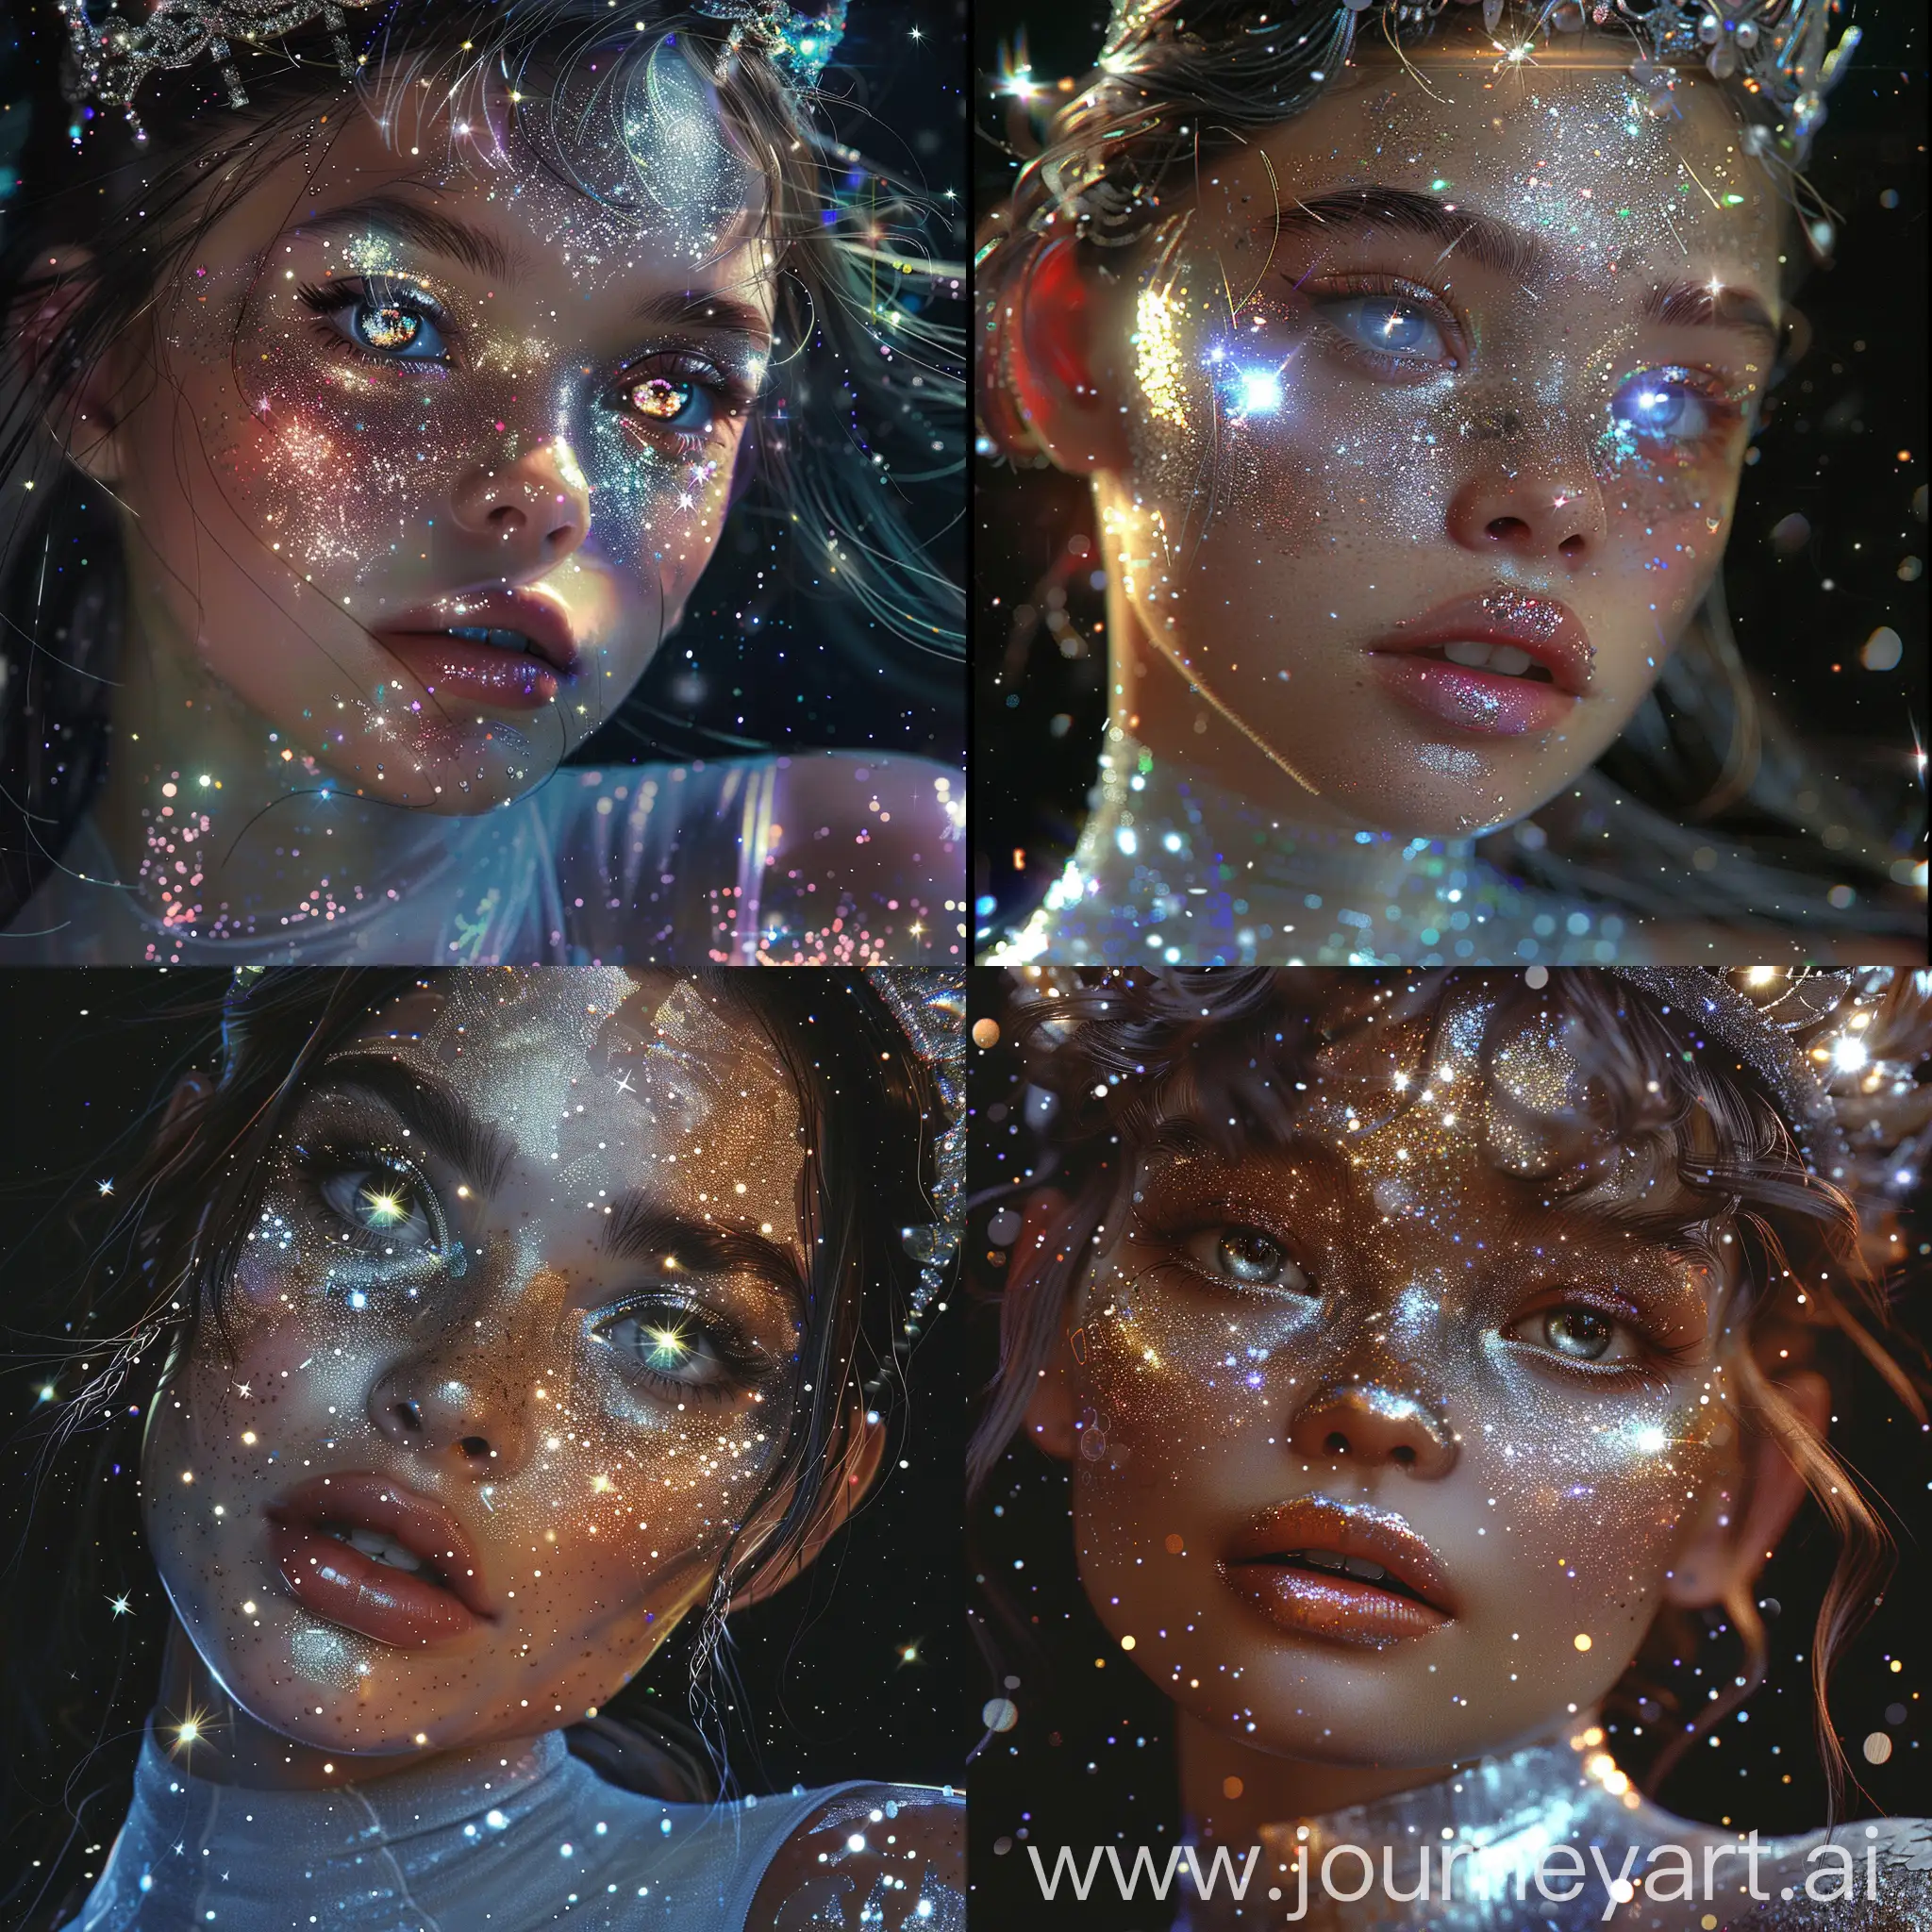 A highly detailed image of a beautiful futuristic girl with bright eyes, glitter on her face and shimmering skin . There is a silver crown on her head. The background is black outer space and the stars are reflected in her eyes. She is wearing a silver top. Beautiful magical fantasy mysterious etheral highly detailed, otherworldly